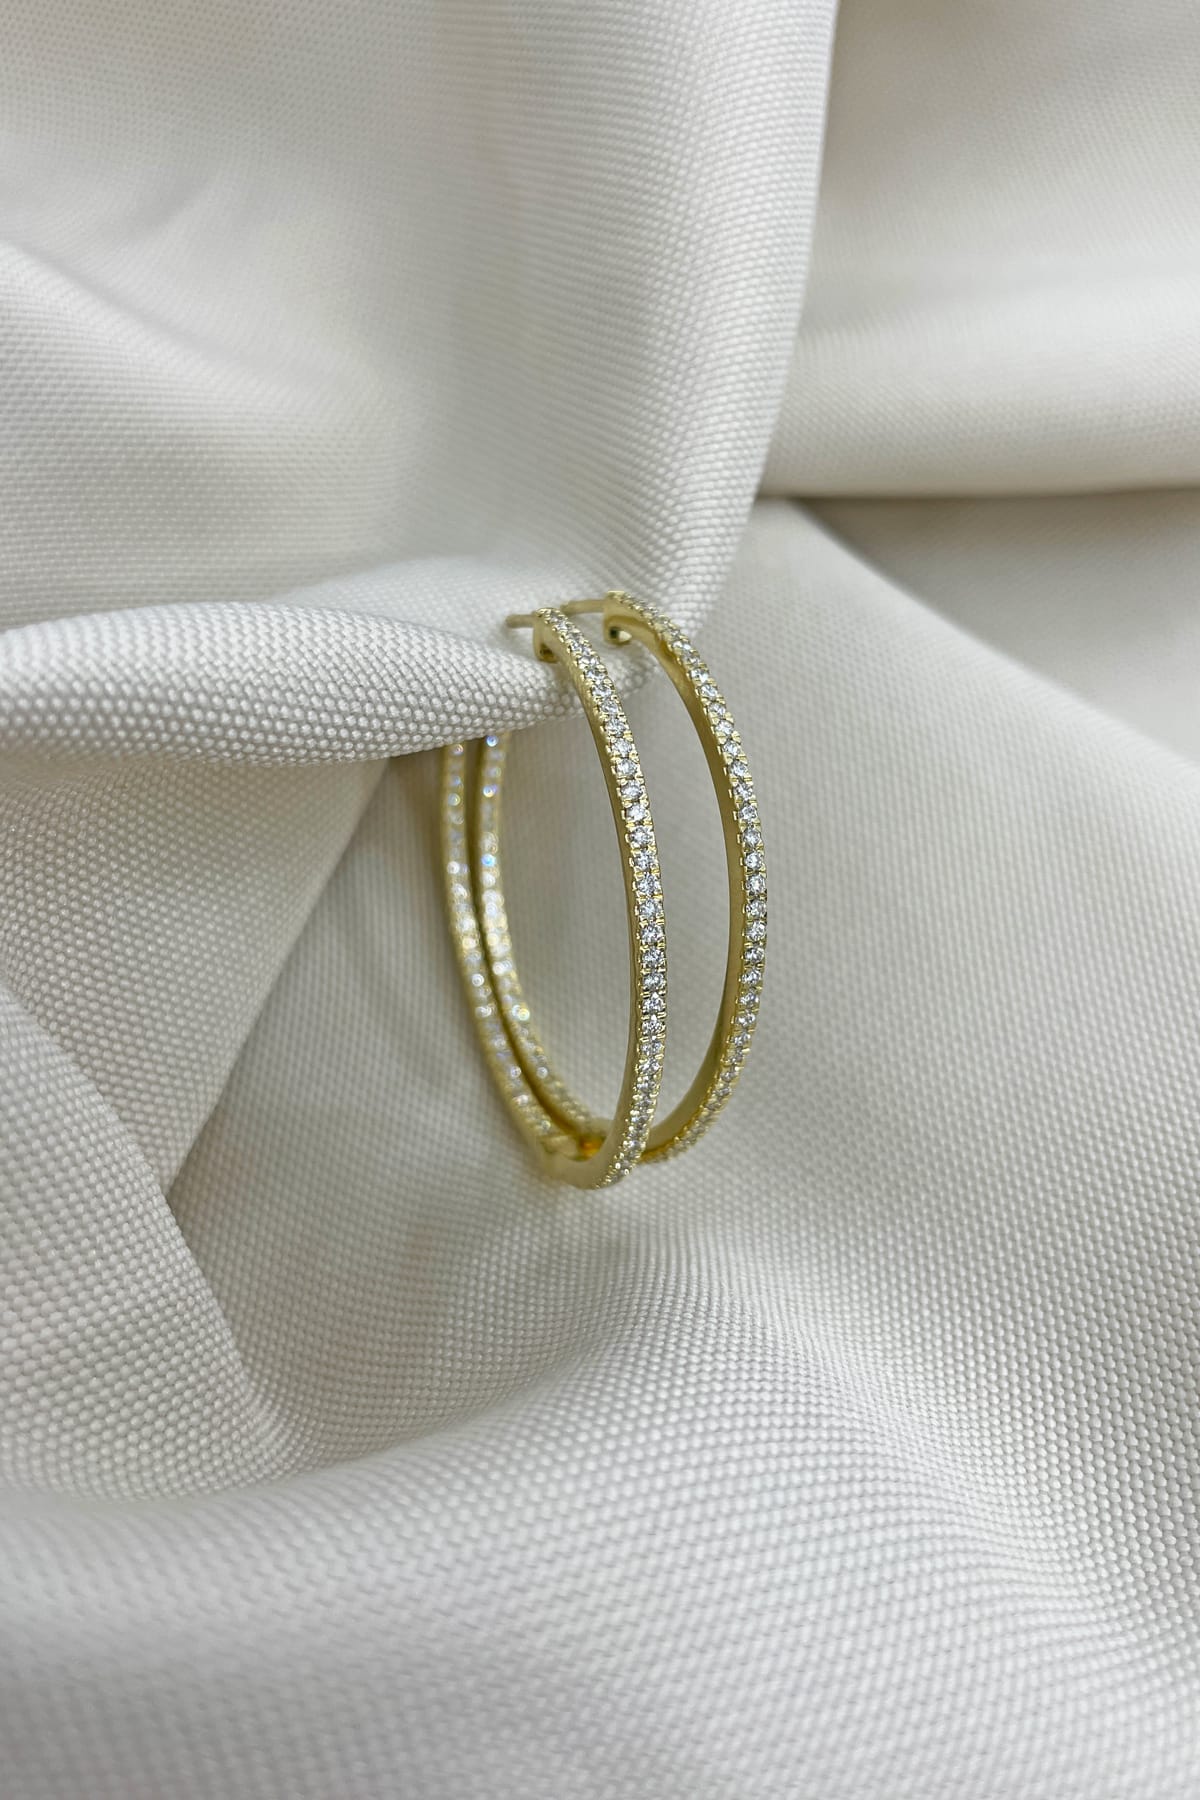 1.25ct Diamond Set Hoop Earrings set in 9ct Yellow Gold available at LeGassick Diamonds and Jewellery Gold Coast, Australia.